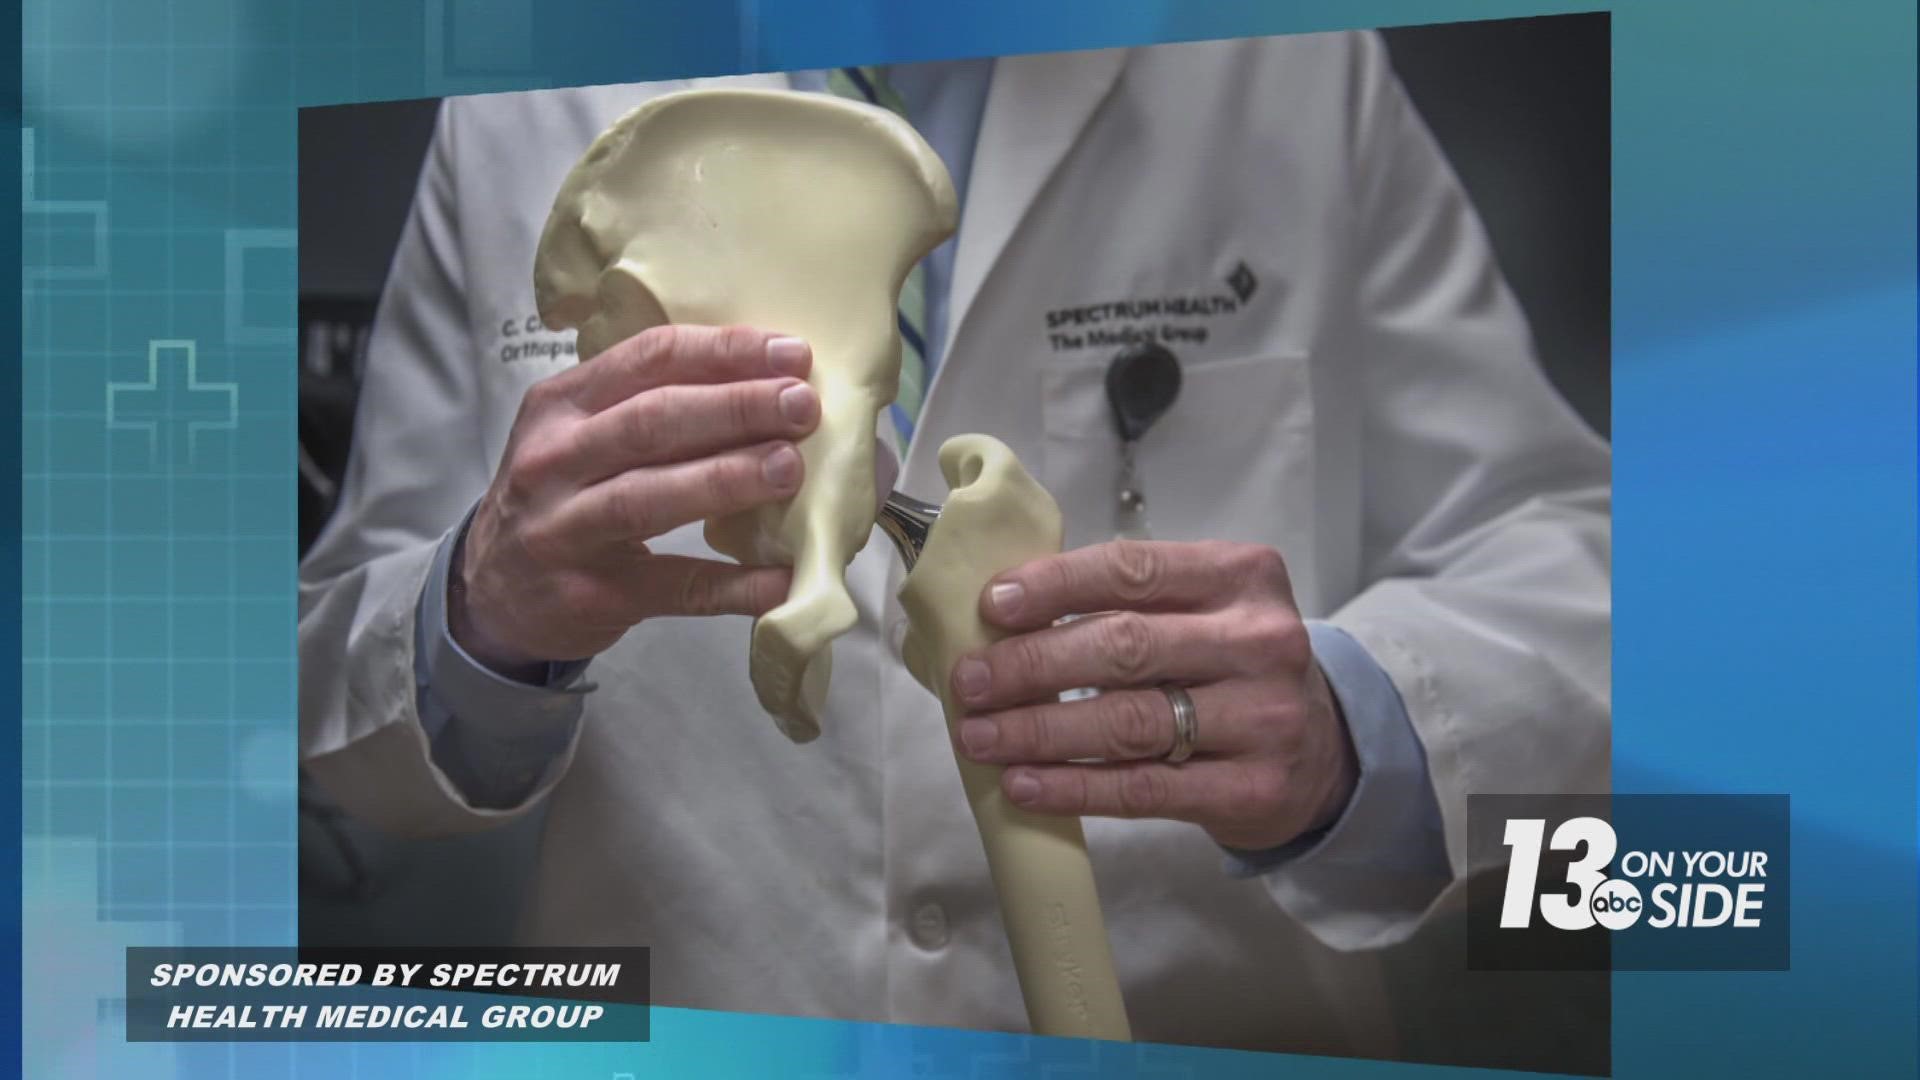 According to Dr. Sherry, 95% of patients report high or very high satisfaction with the joint replacement experience.